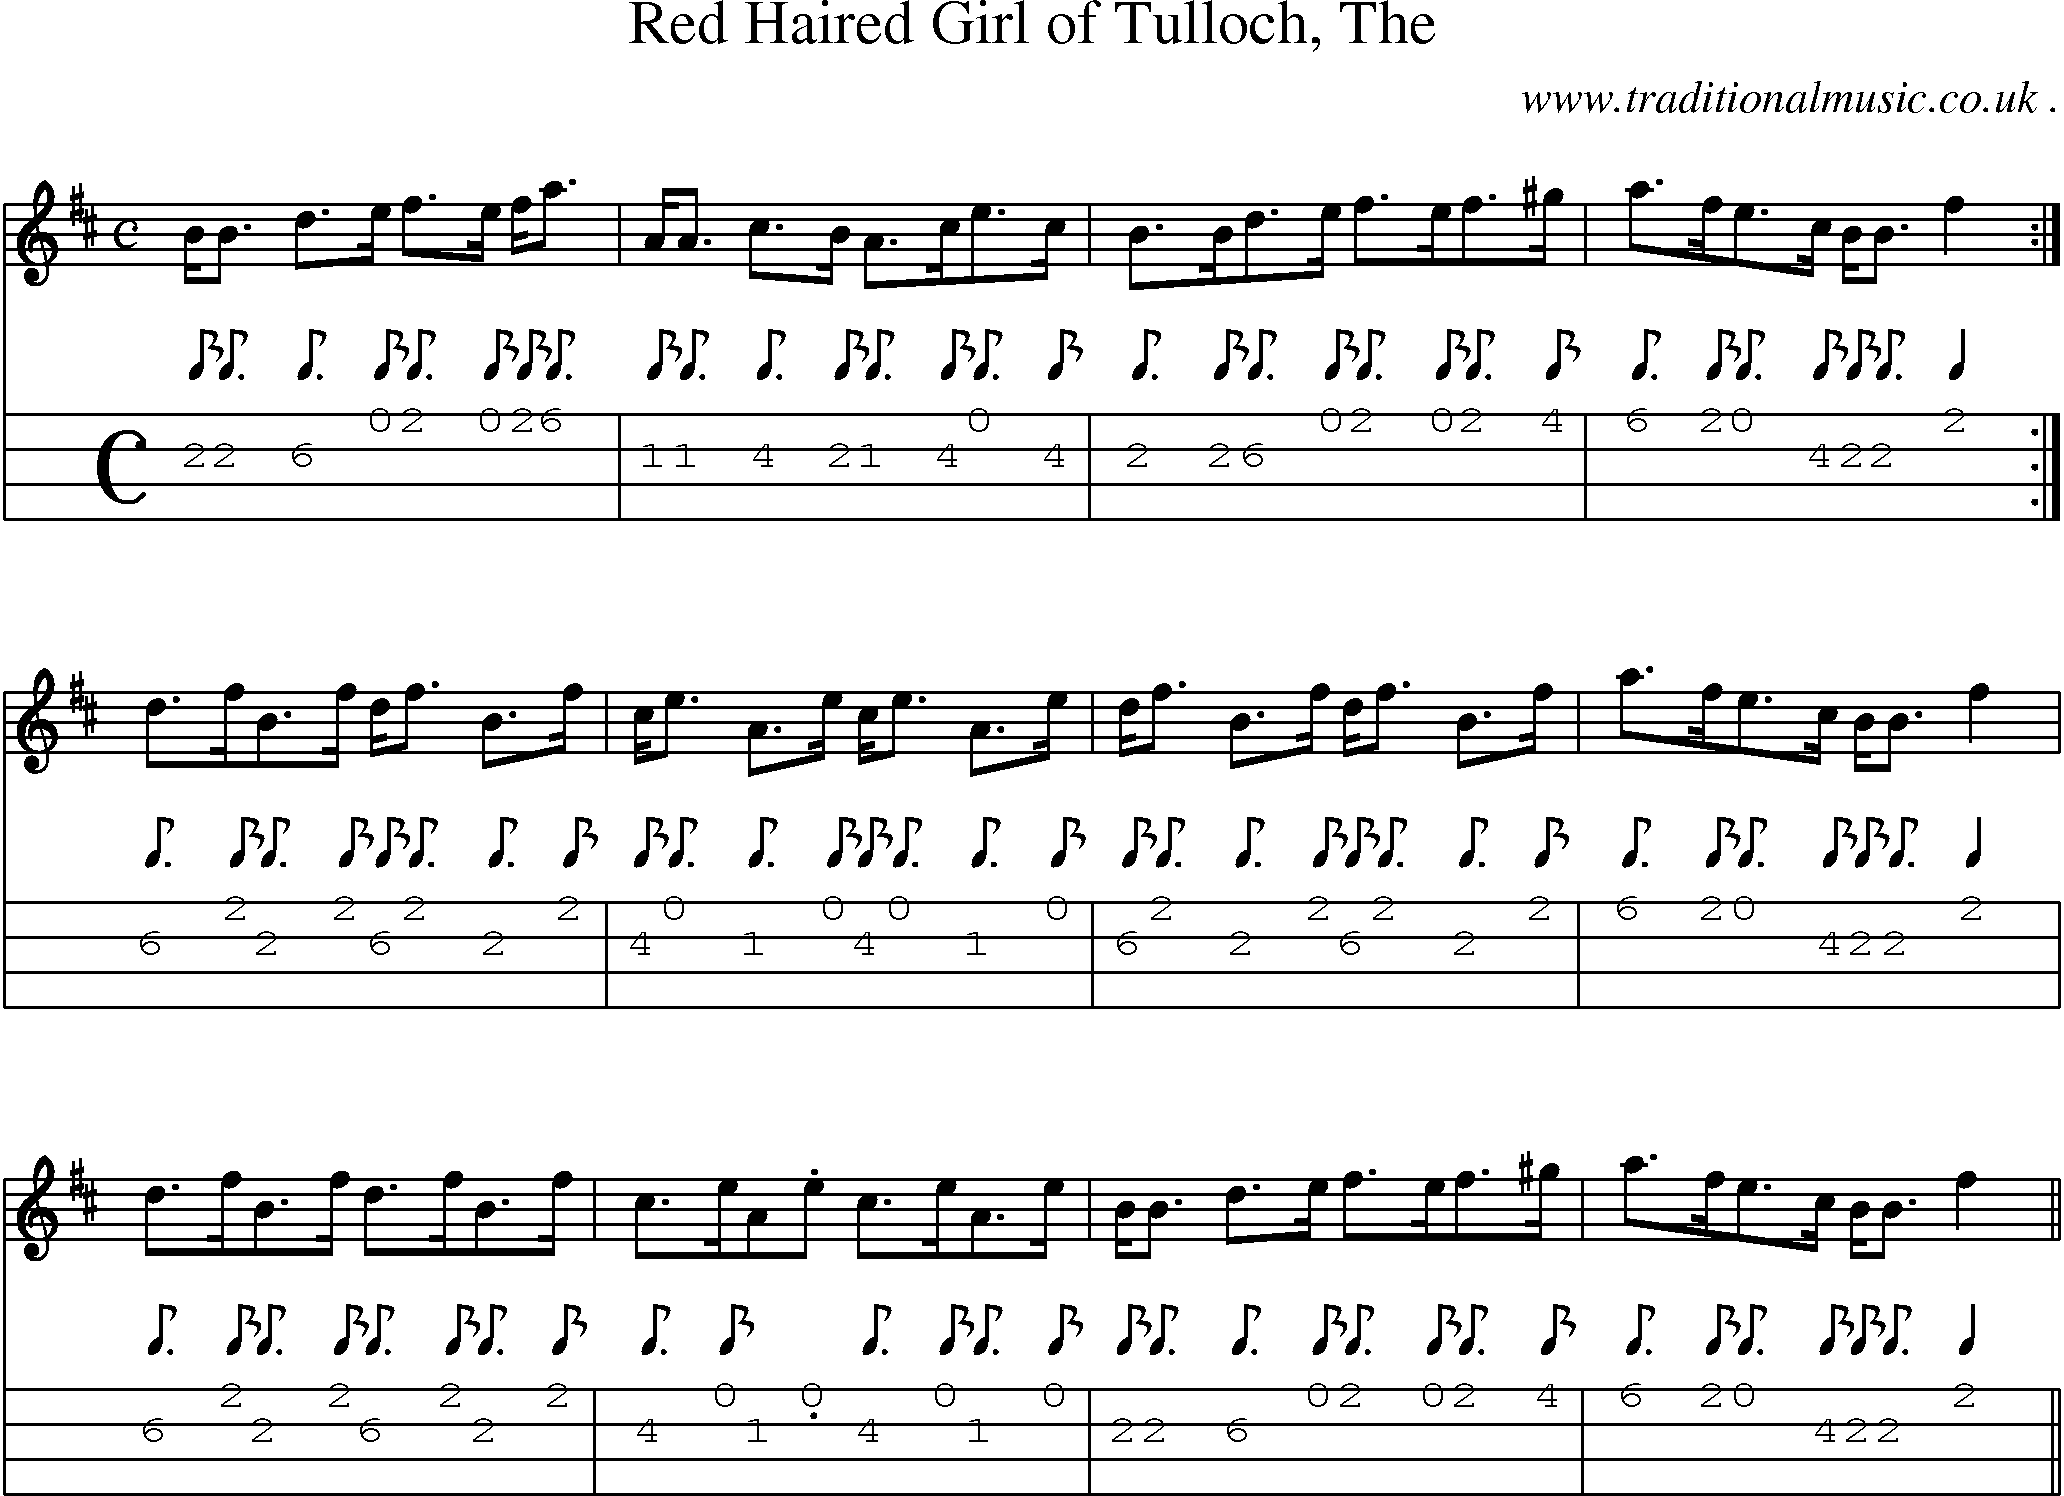 Sheet-music  score, Chords and Mandolin Tabs for Red Haired Girl Of Tulloch The